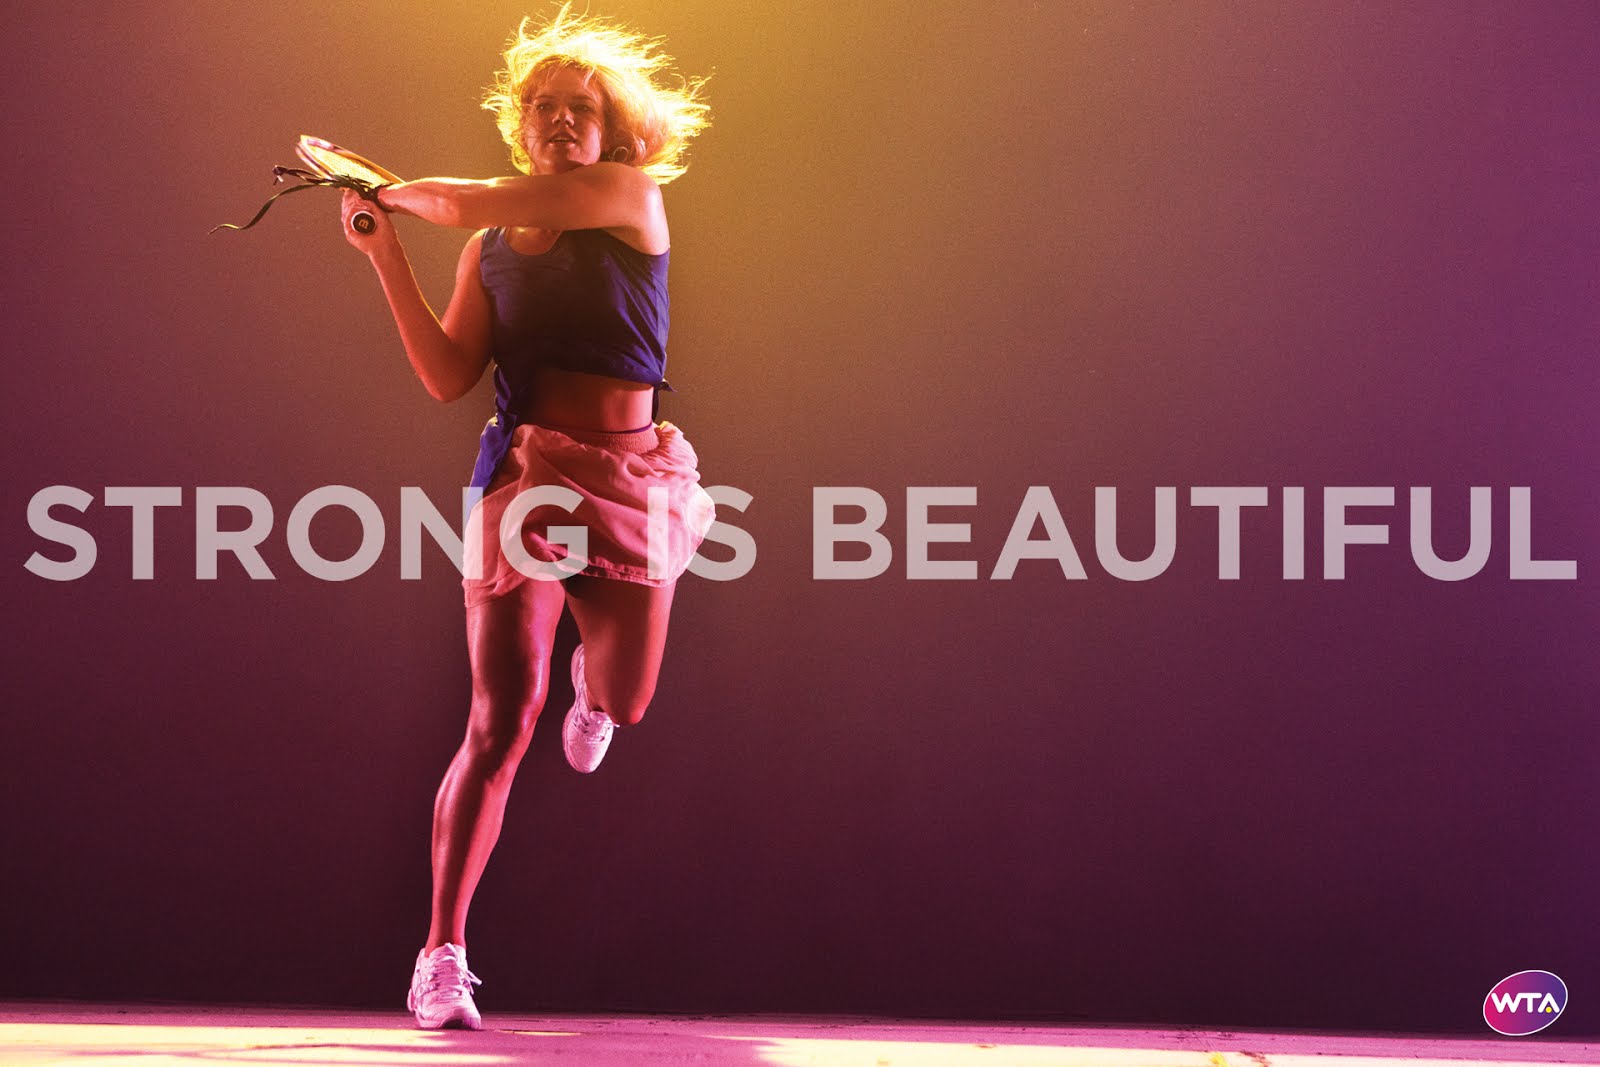 Strong Beauty. Strong is beautiful